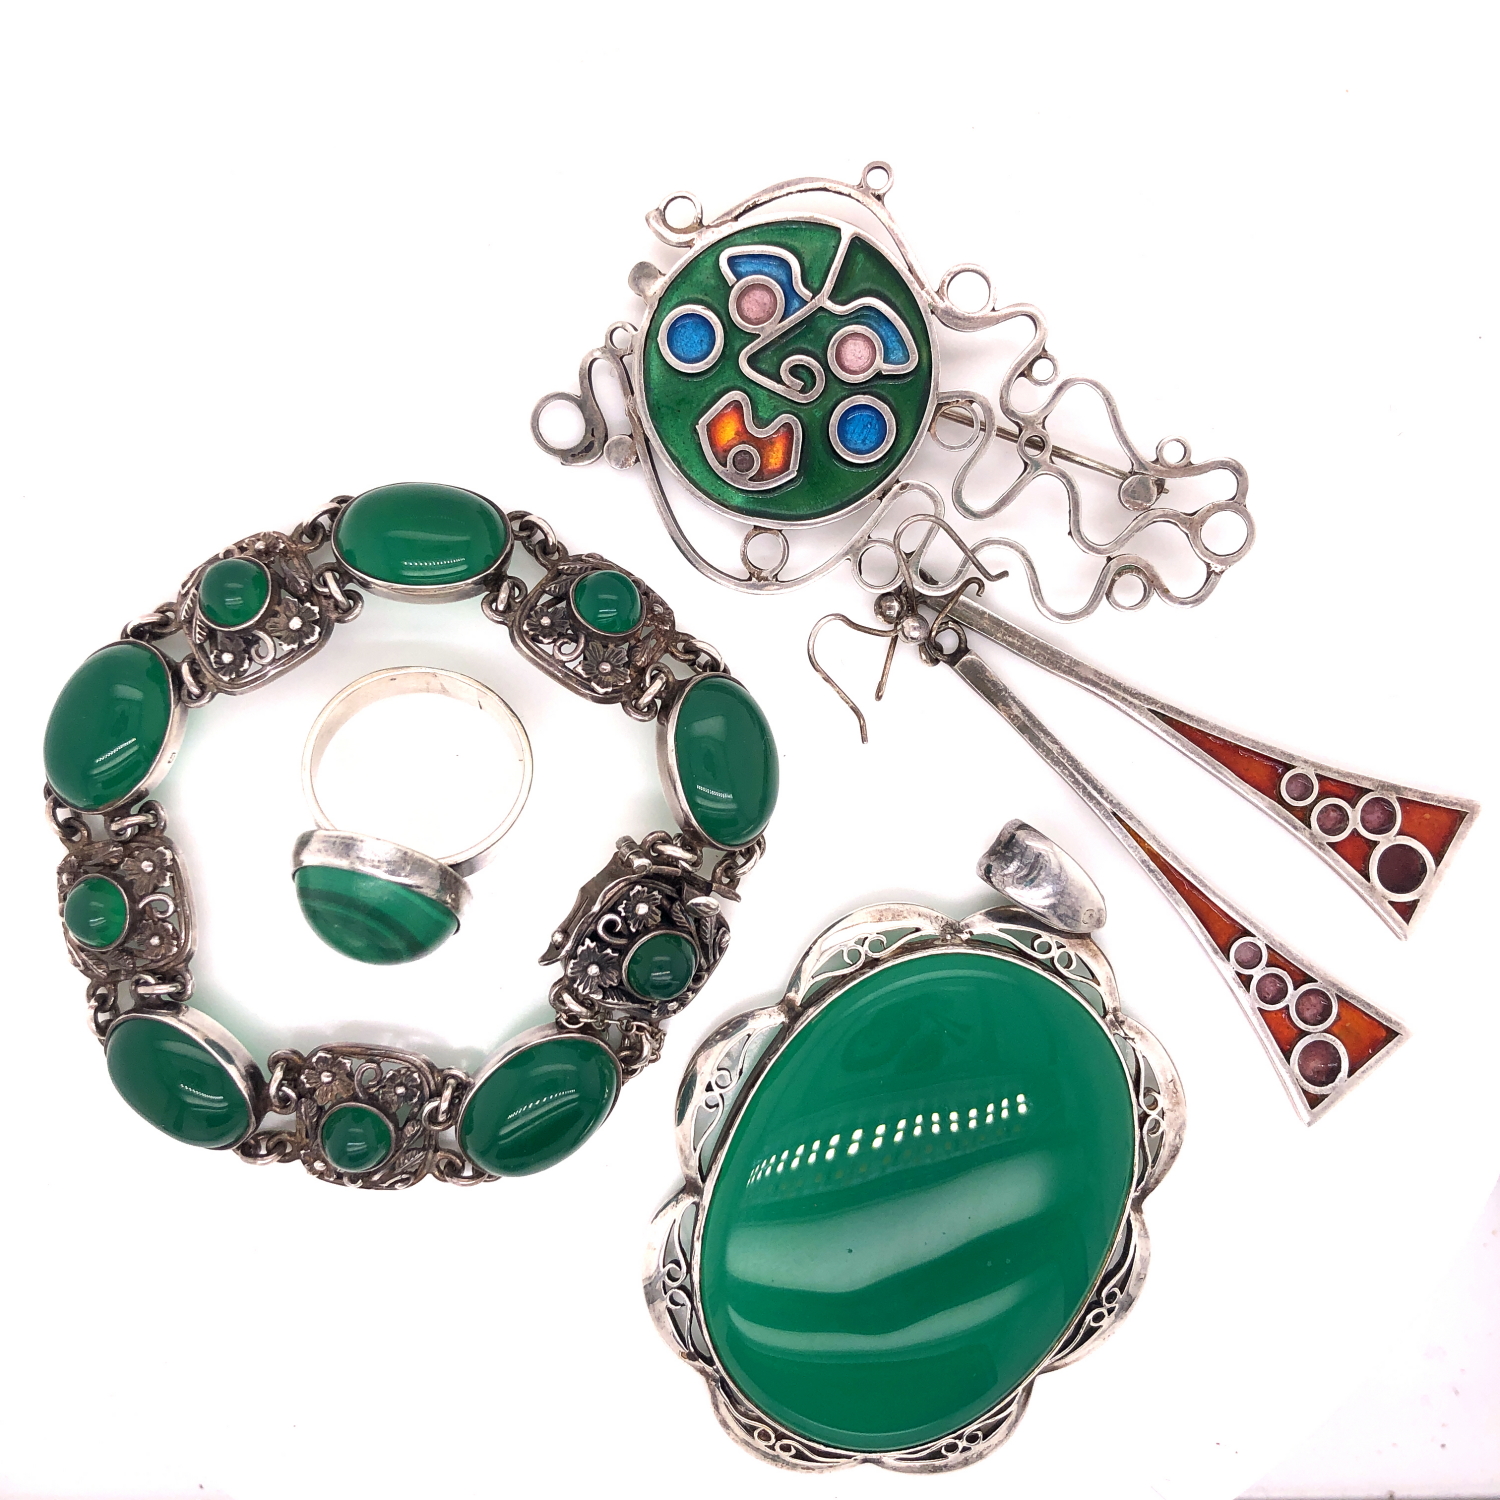 A PAIR OF NORMAN GRANT SILVER AND ENAMEL DROP EARRINGS AND A NORMAN GRANT SILVER AND ENAMEL BROOCH